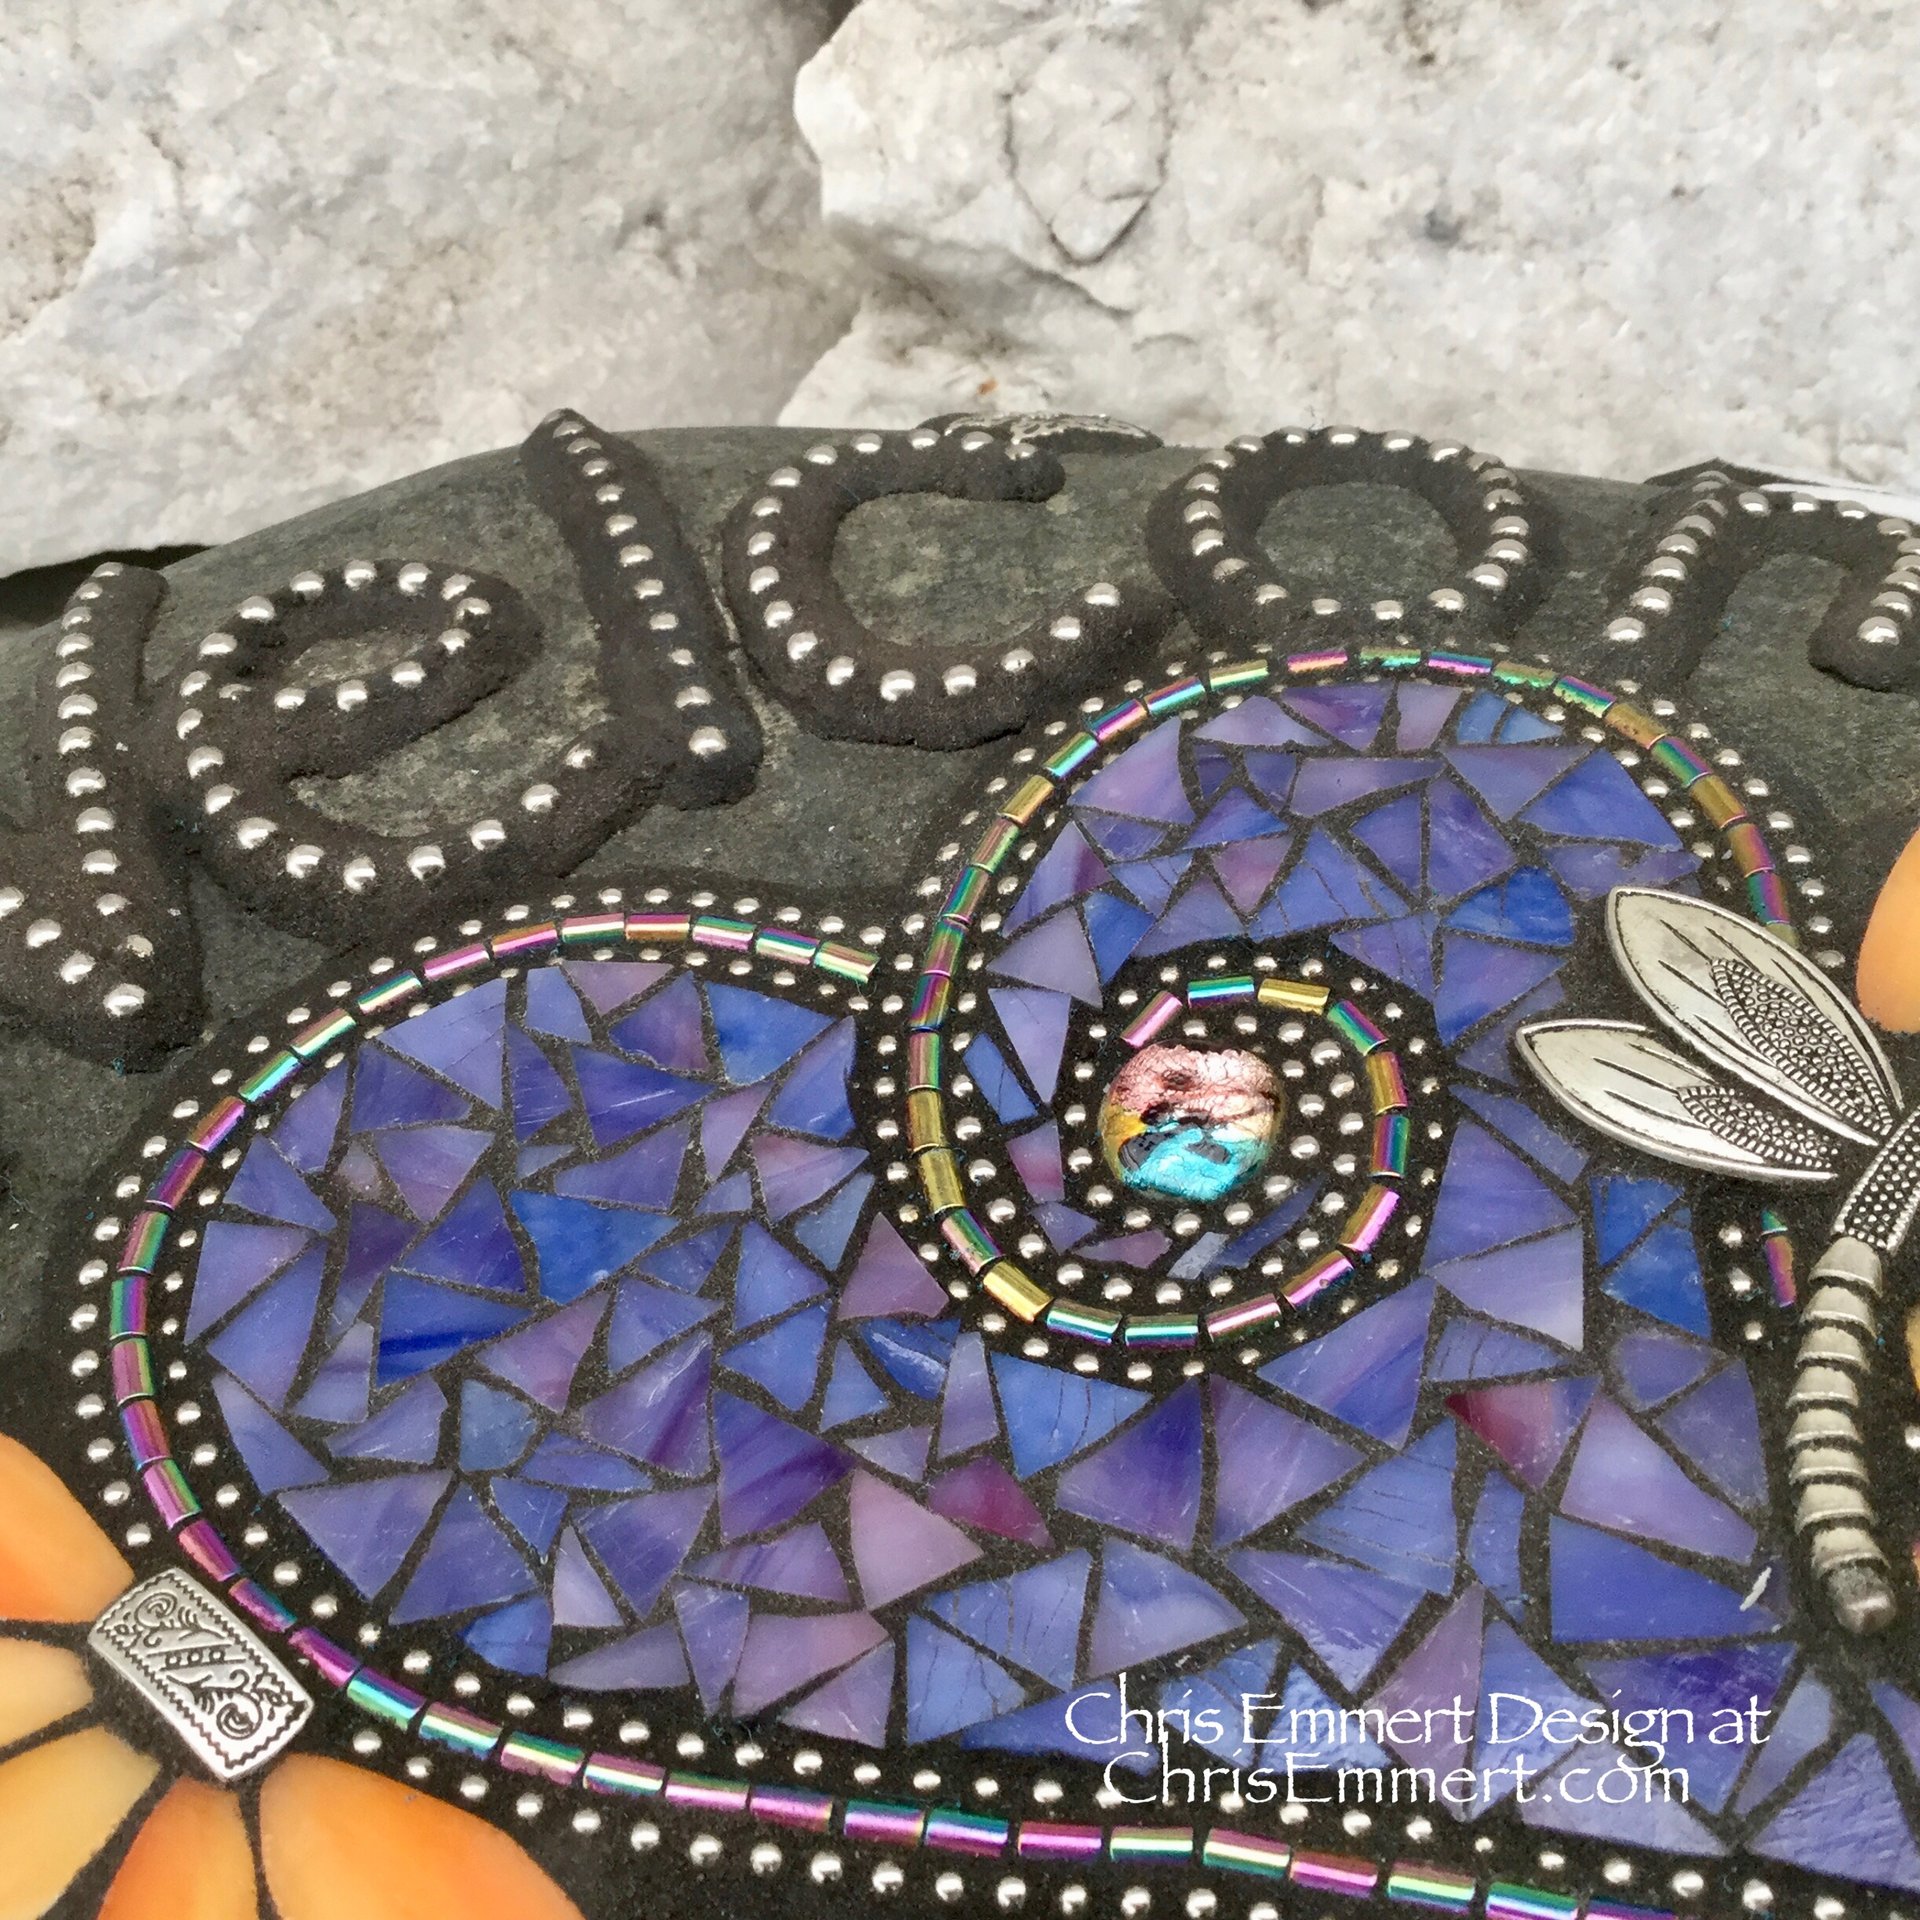 Large Welcome Purple Heart Stone with Dragonfly, Porch Decor, Garden Stone, Mosaic, Garden Decor